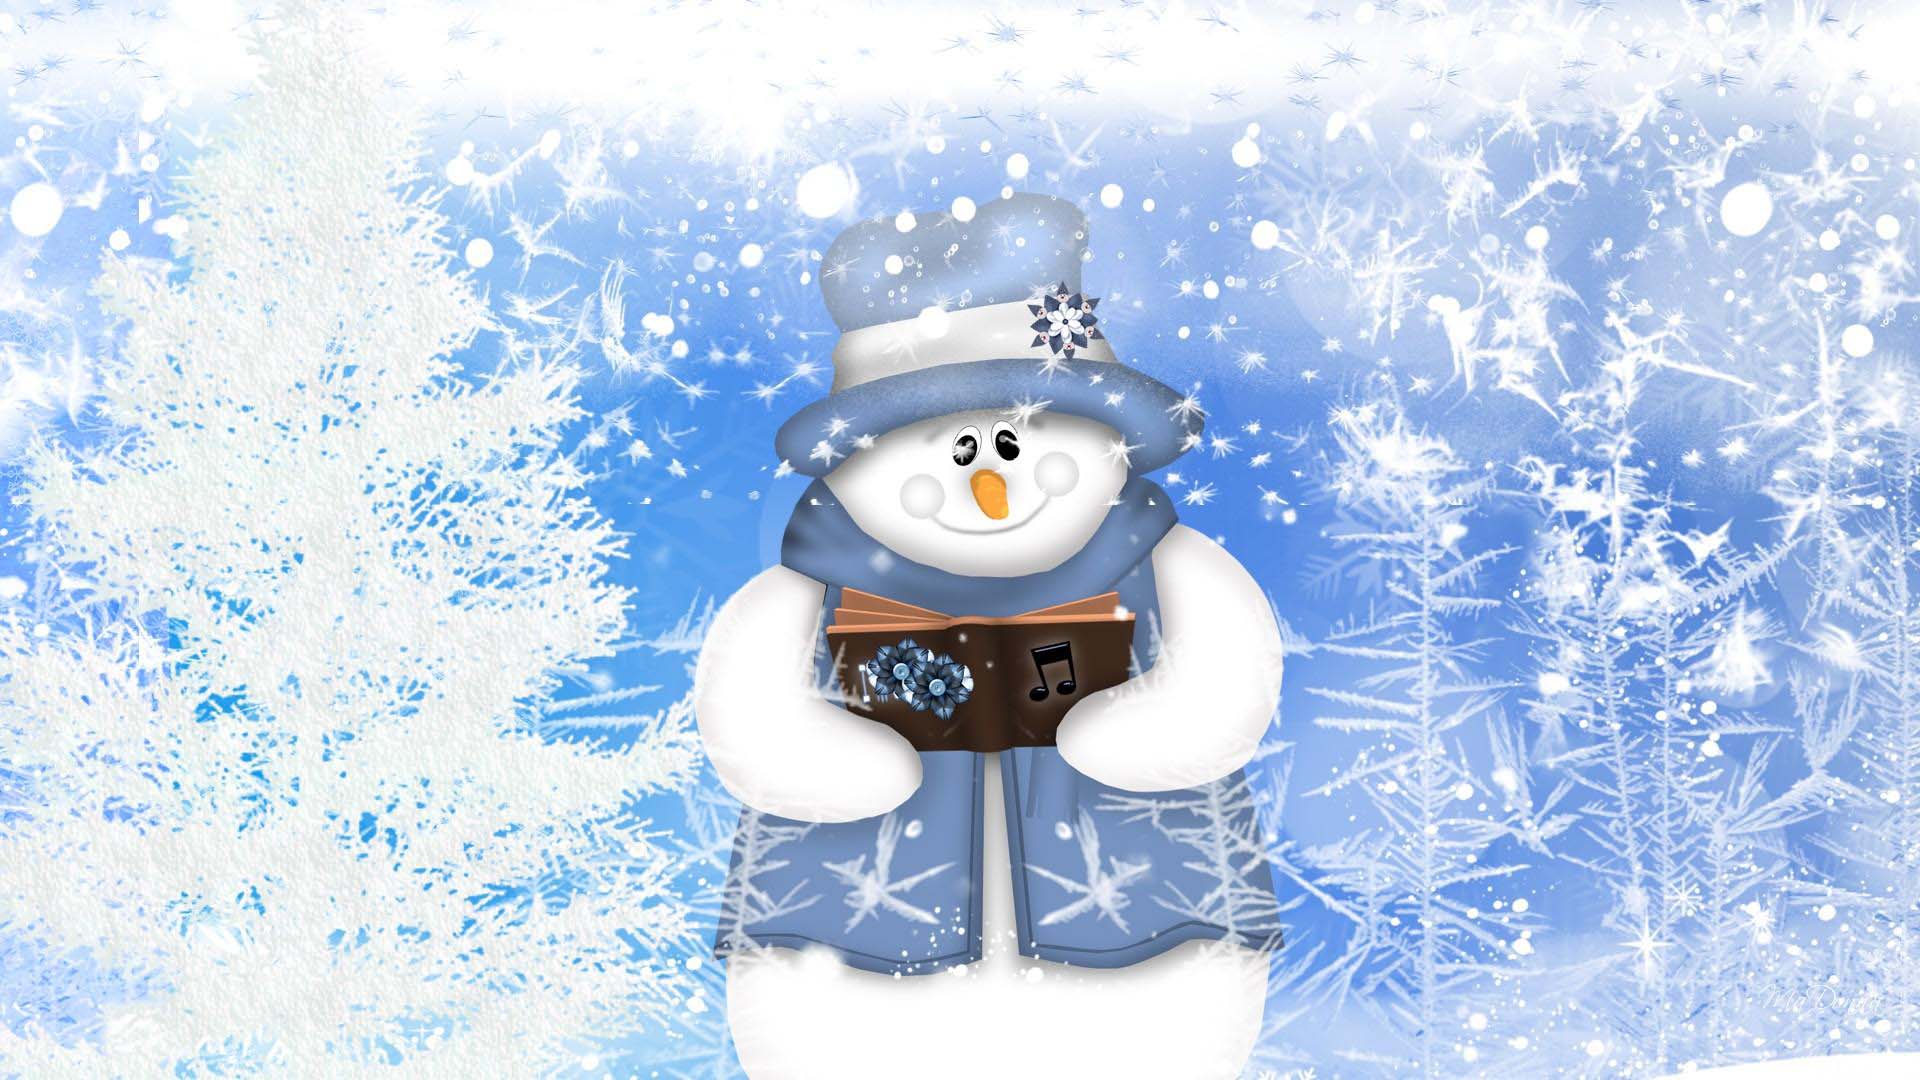 Now You Can Choose Any One Of The Listed Frosty Snowman Wallpaper